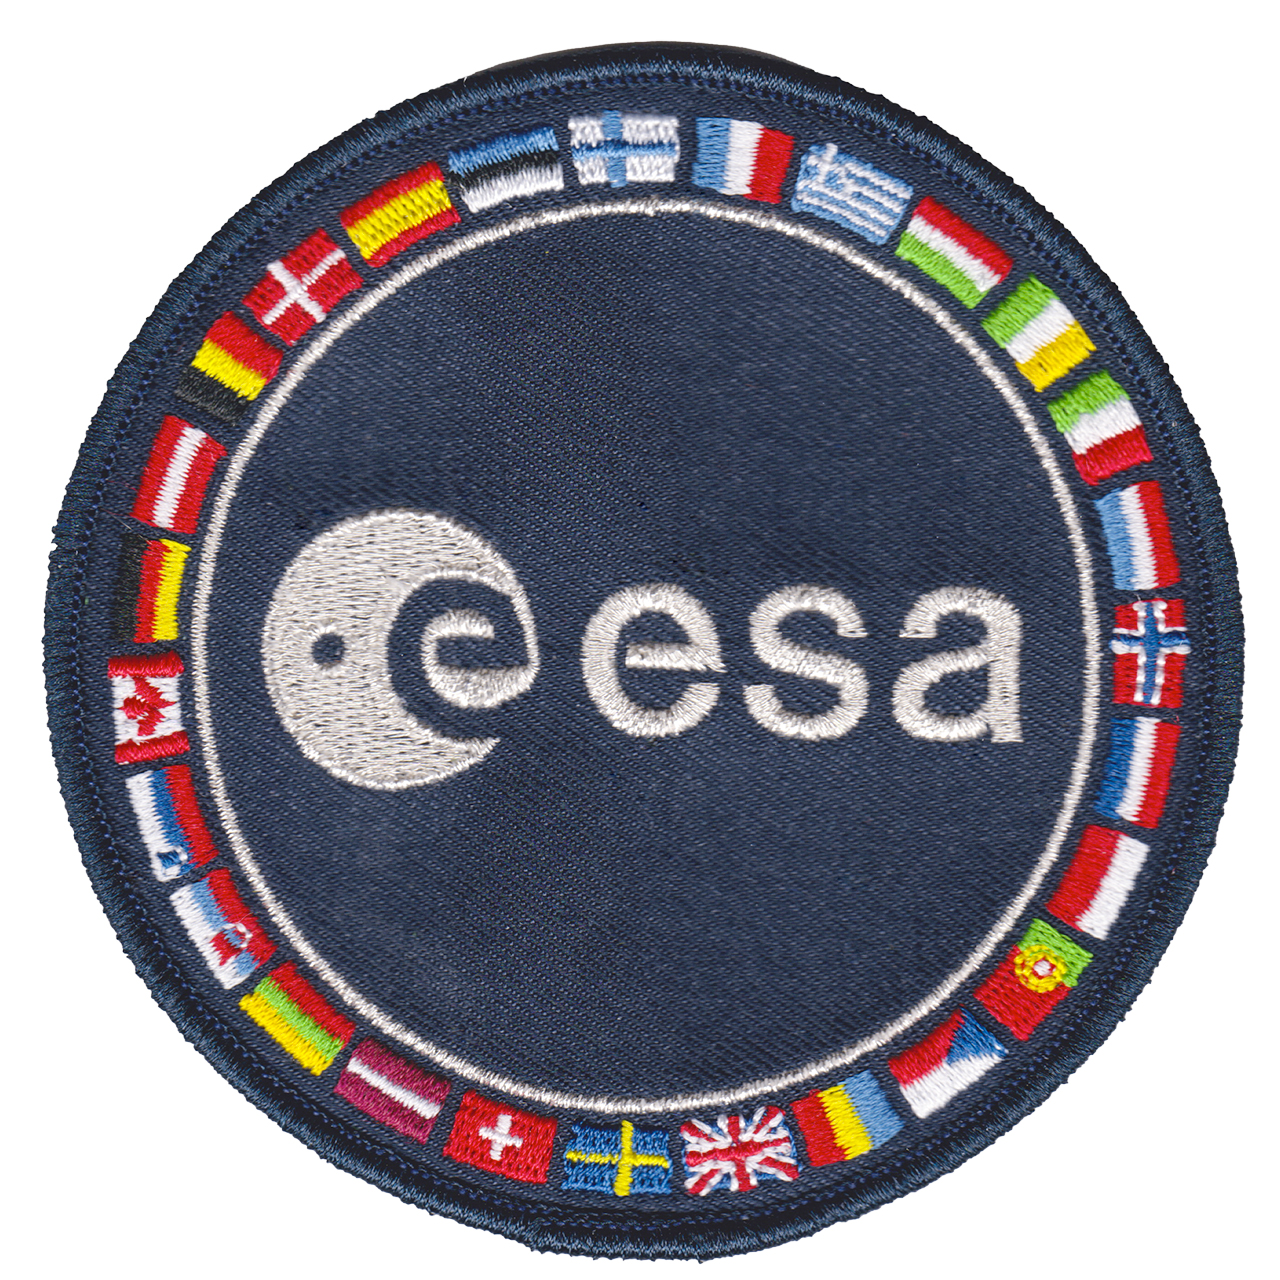 ESA's astronaut patch features the flags for all 22 member states, as well as cooperating and associate members' flags.